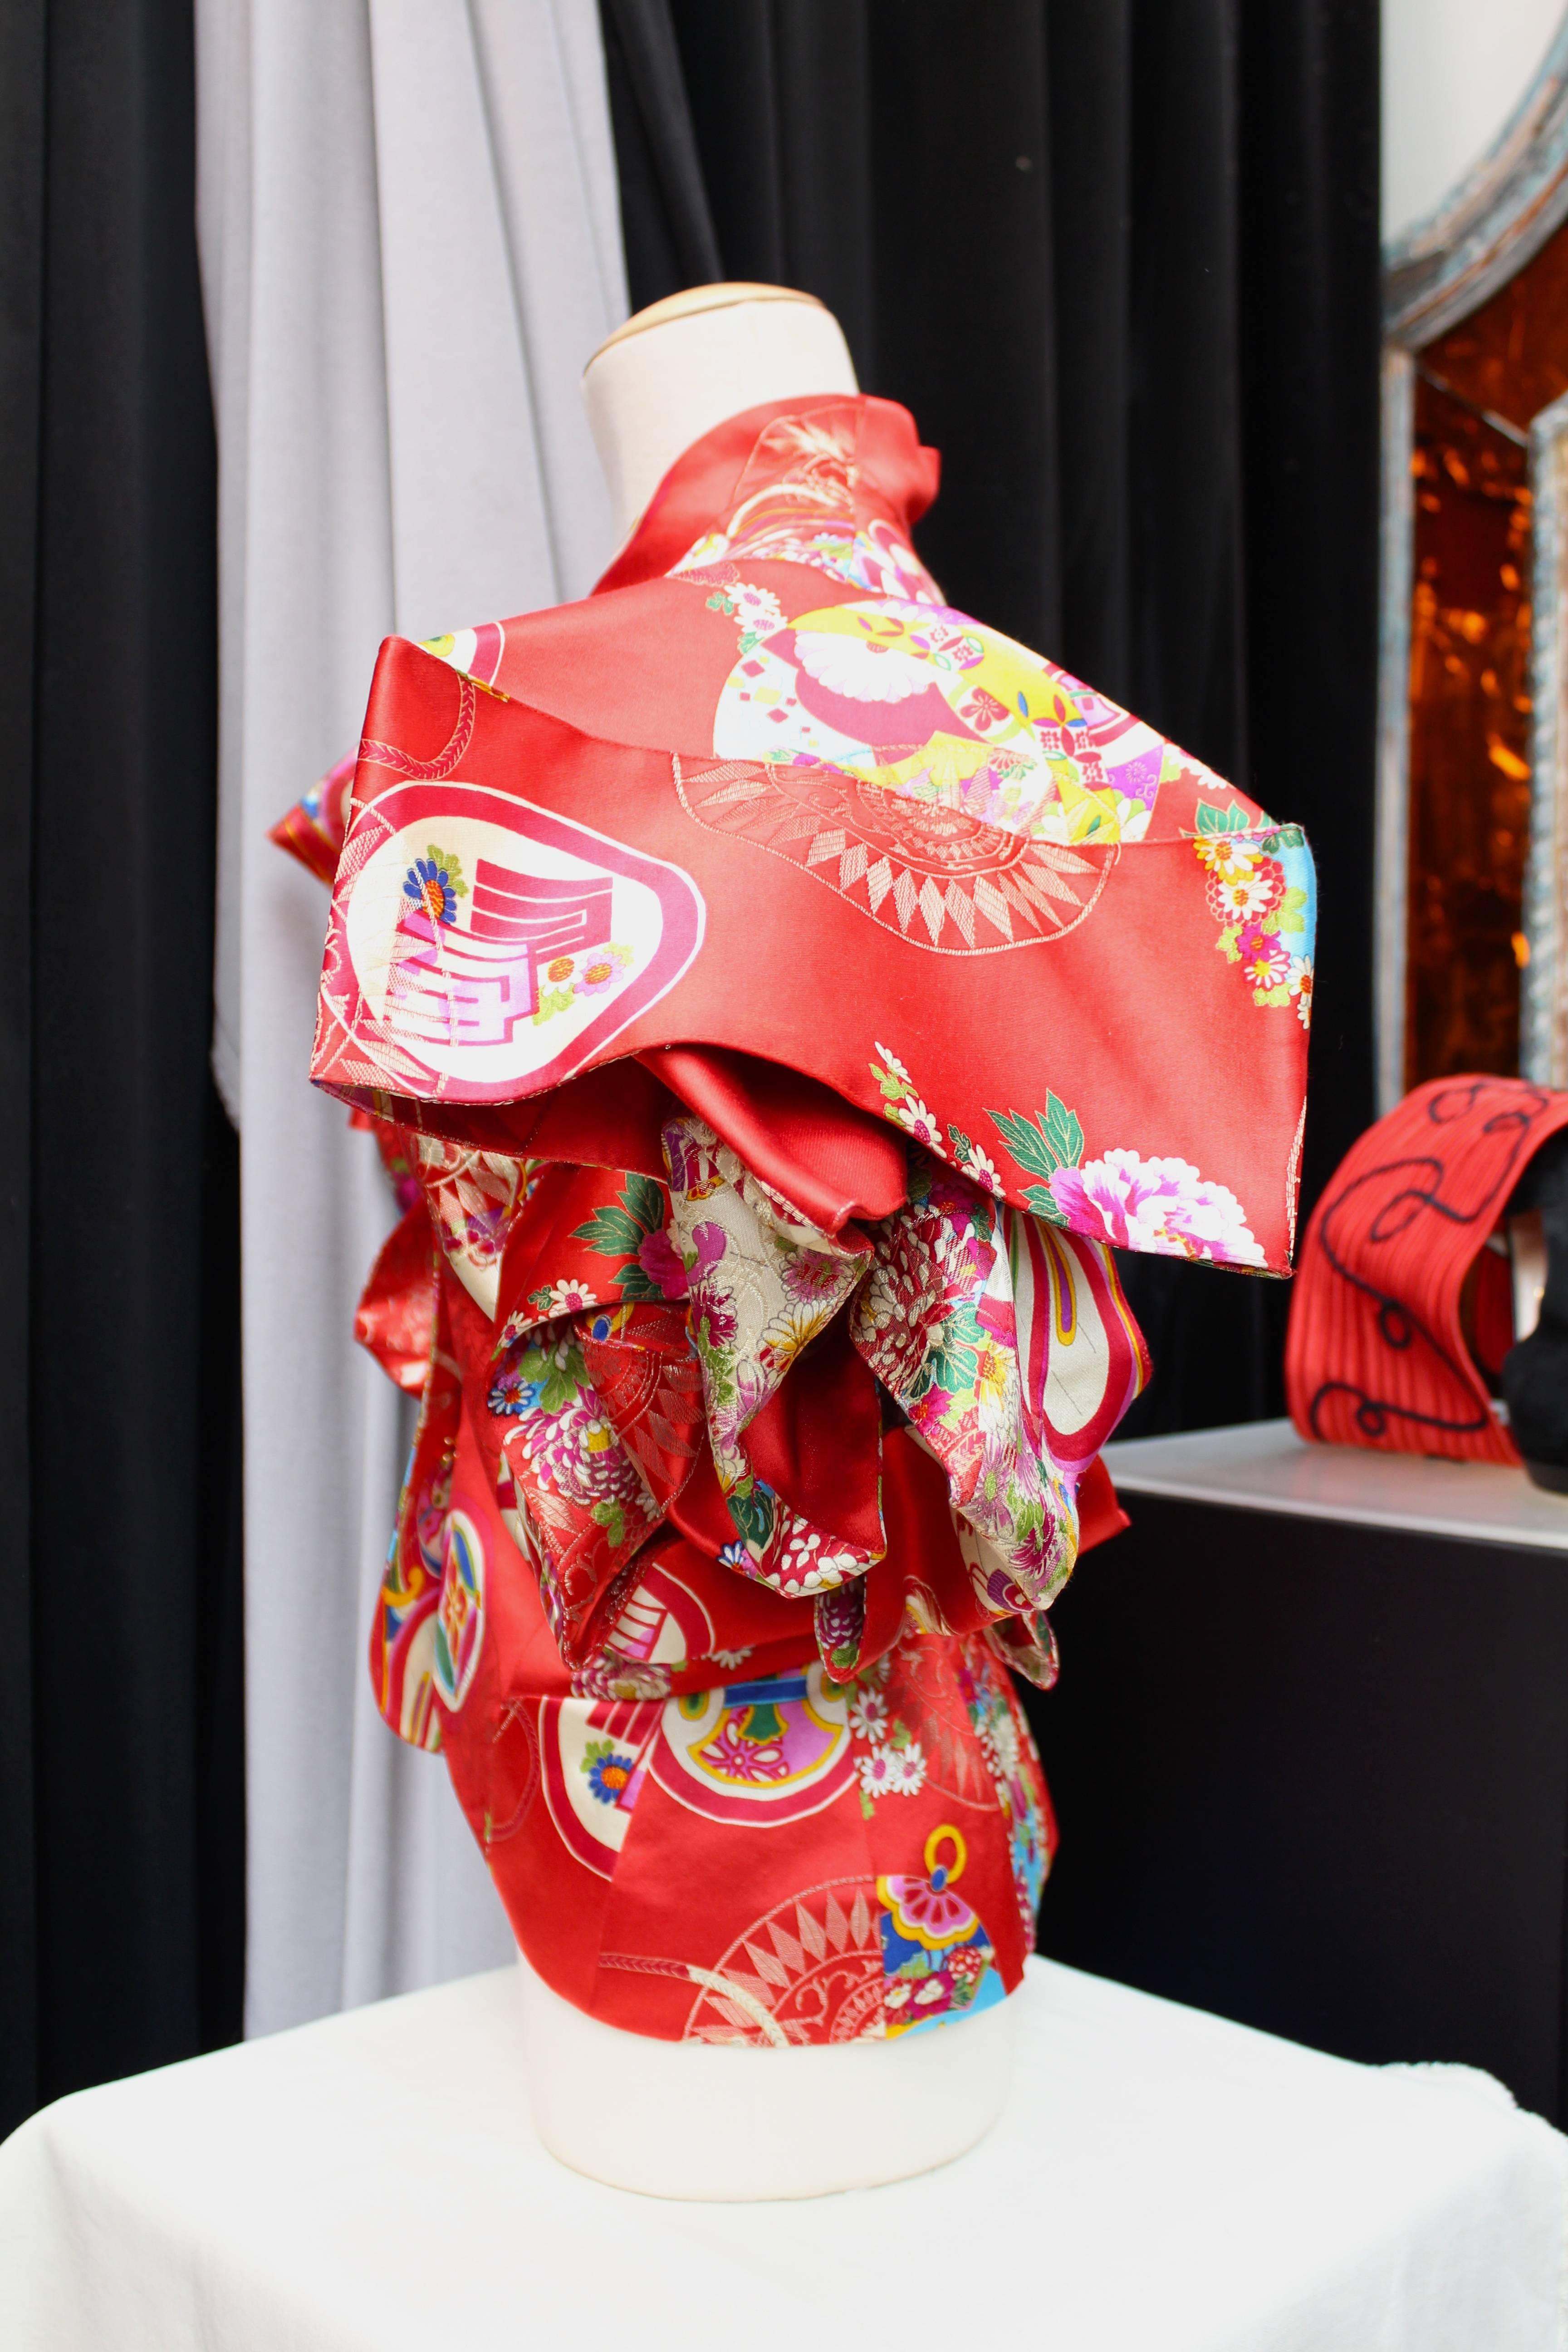 CHRISTIAN DIOR BOUTIQUE (Paris) Red silk jacket printed with kimono style design featuring dramatized voluminous 3-D cutting short sleeves in the style of chinese folkloric kites. 

The jacket closes in the front with a series of invisible gold